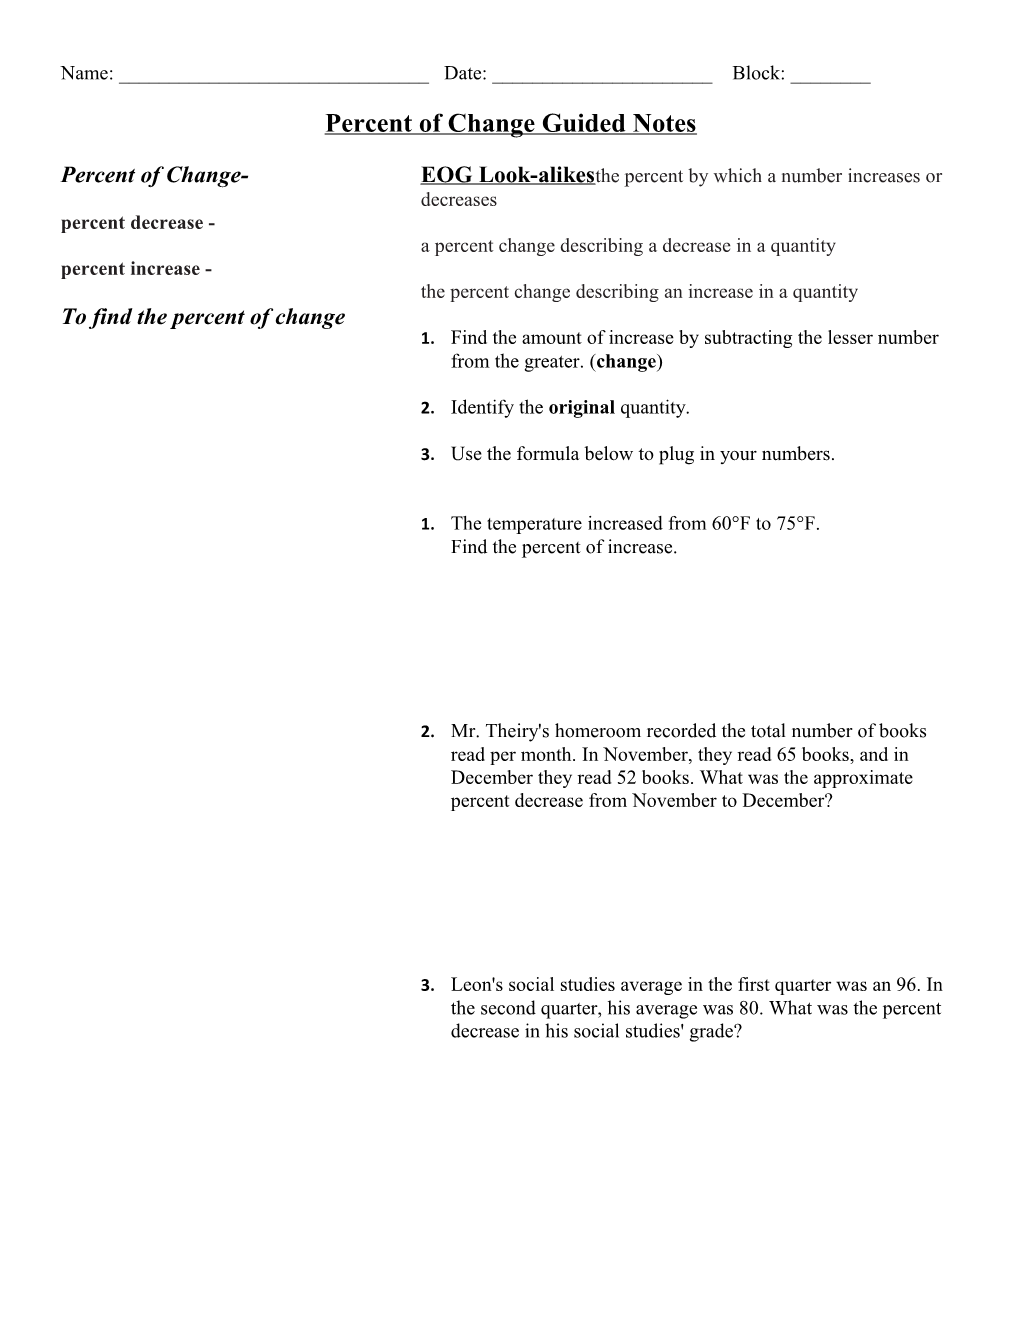 Percent of Change Guided Notes